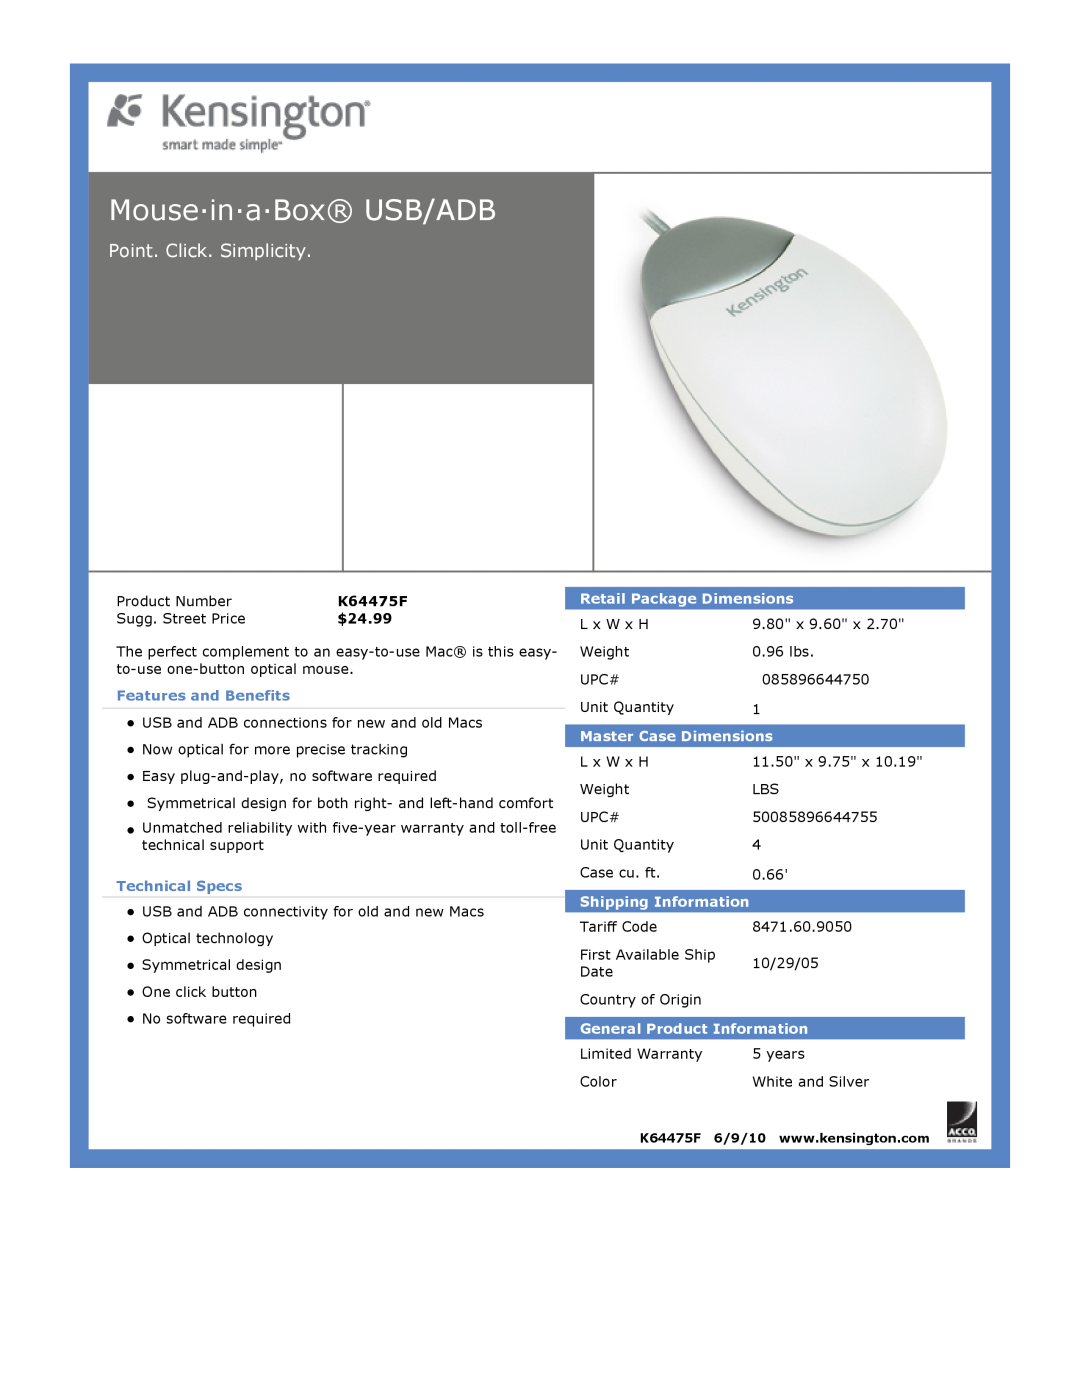 Kensington EU64325 Mouse·in·a·Box USB/ADB, Point. Click. Simplicity, $24.99, Features and Benefits, Technical Specs 